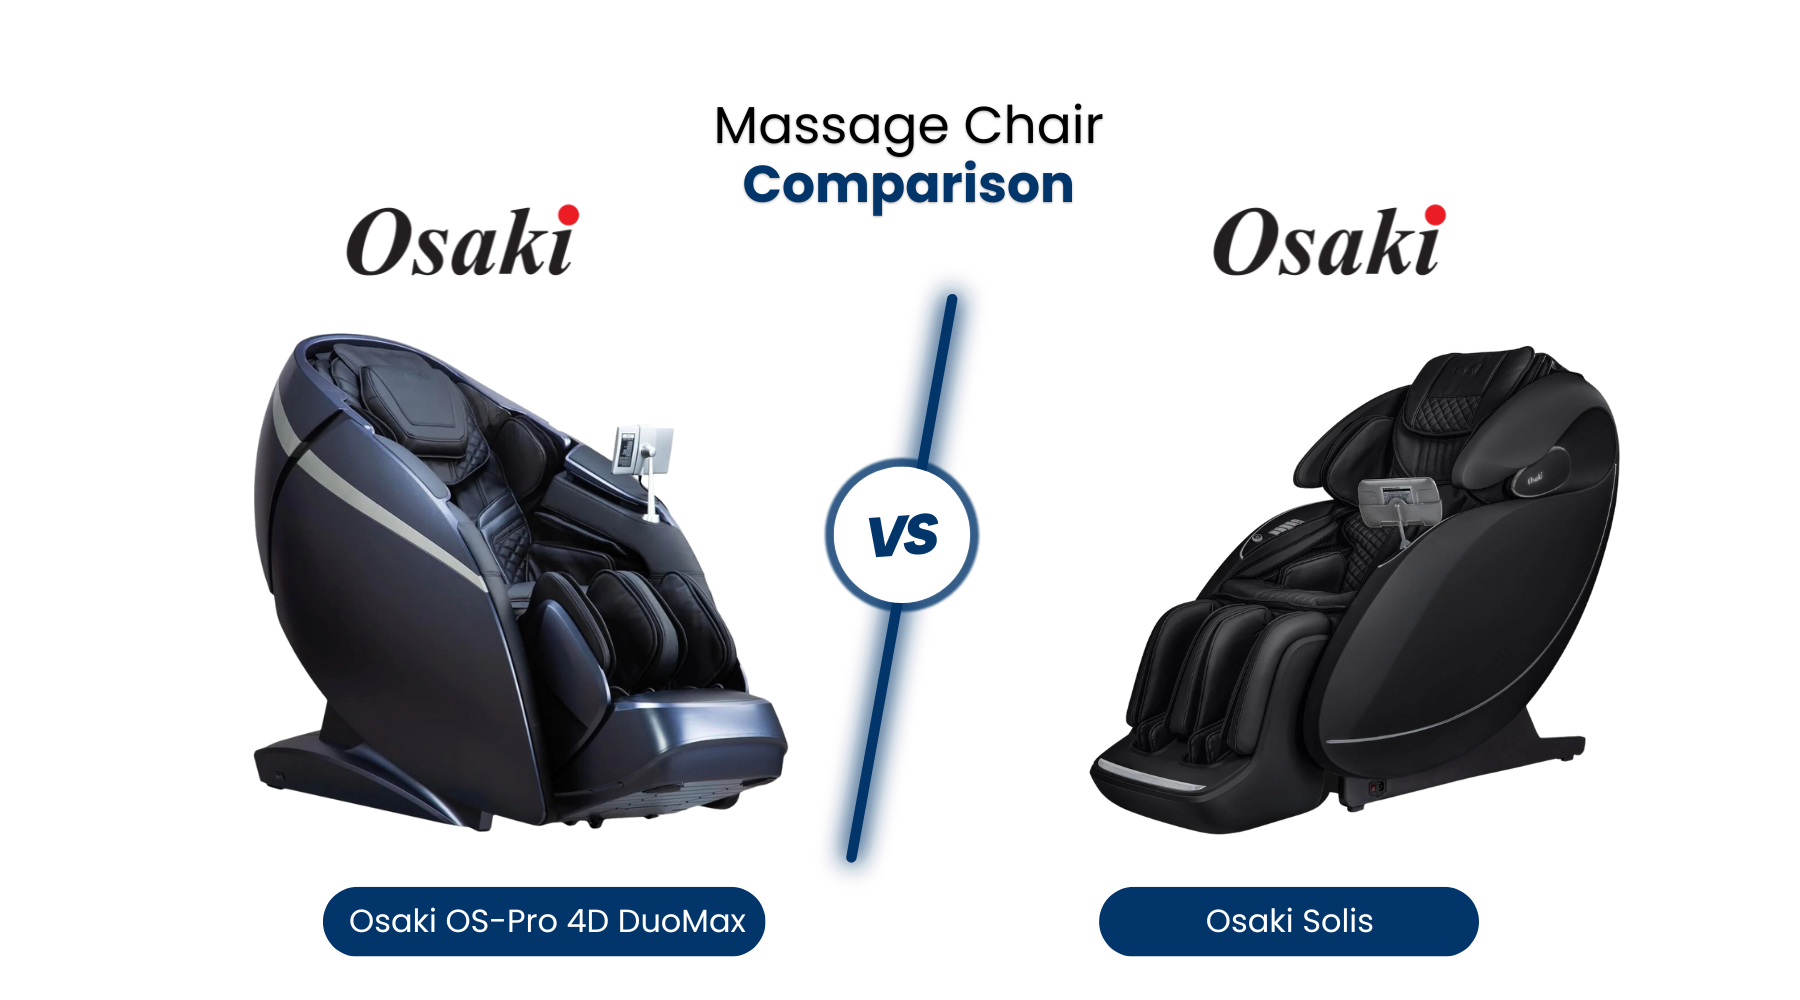 In this comprehensive massage chair comparison, we’ll compare the similarities and differences between the Osaki DuoMax and Osaki Solis dual track massage chairs. 